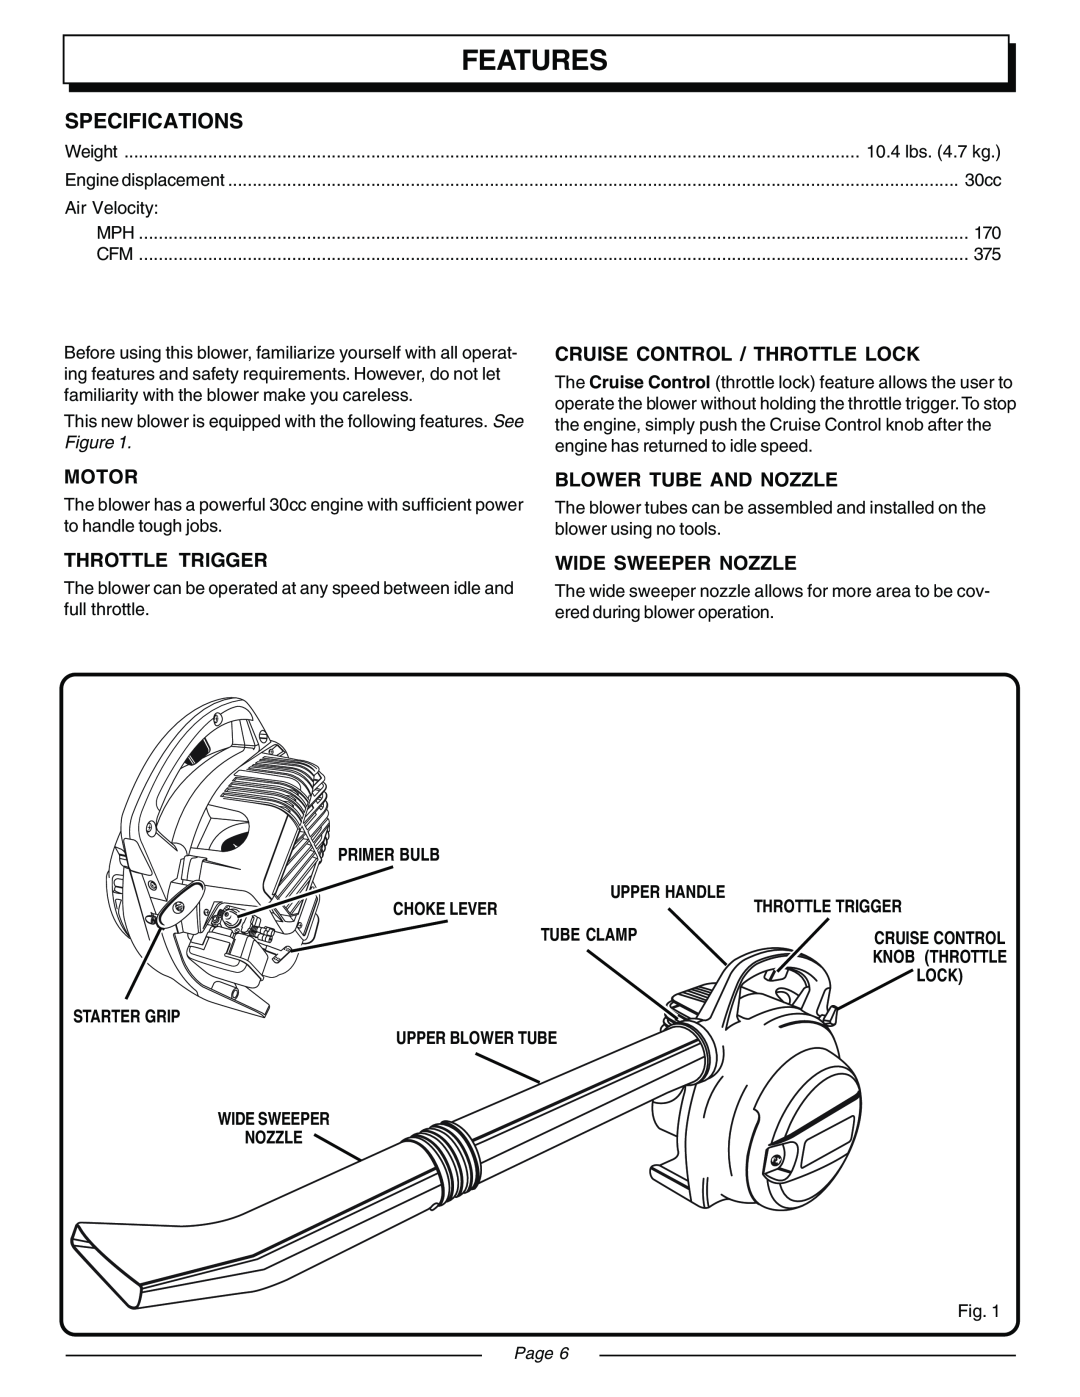 Homelite UT08120B, UT08931 Features, Cruise Control / Throttle Lock, Motor, Blower Tube And Nozzle, Throttle Trigger, Page 